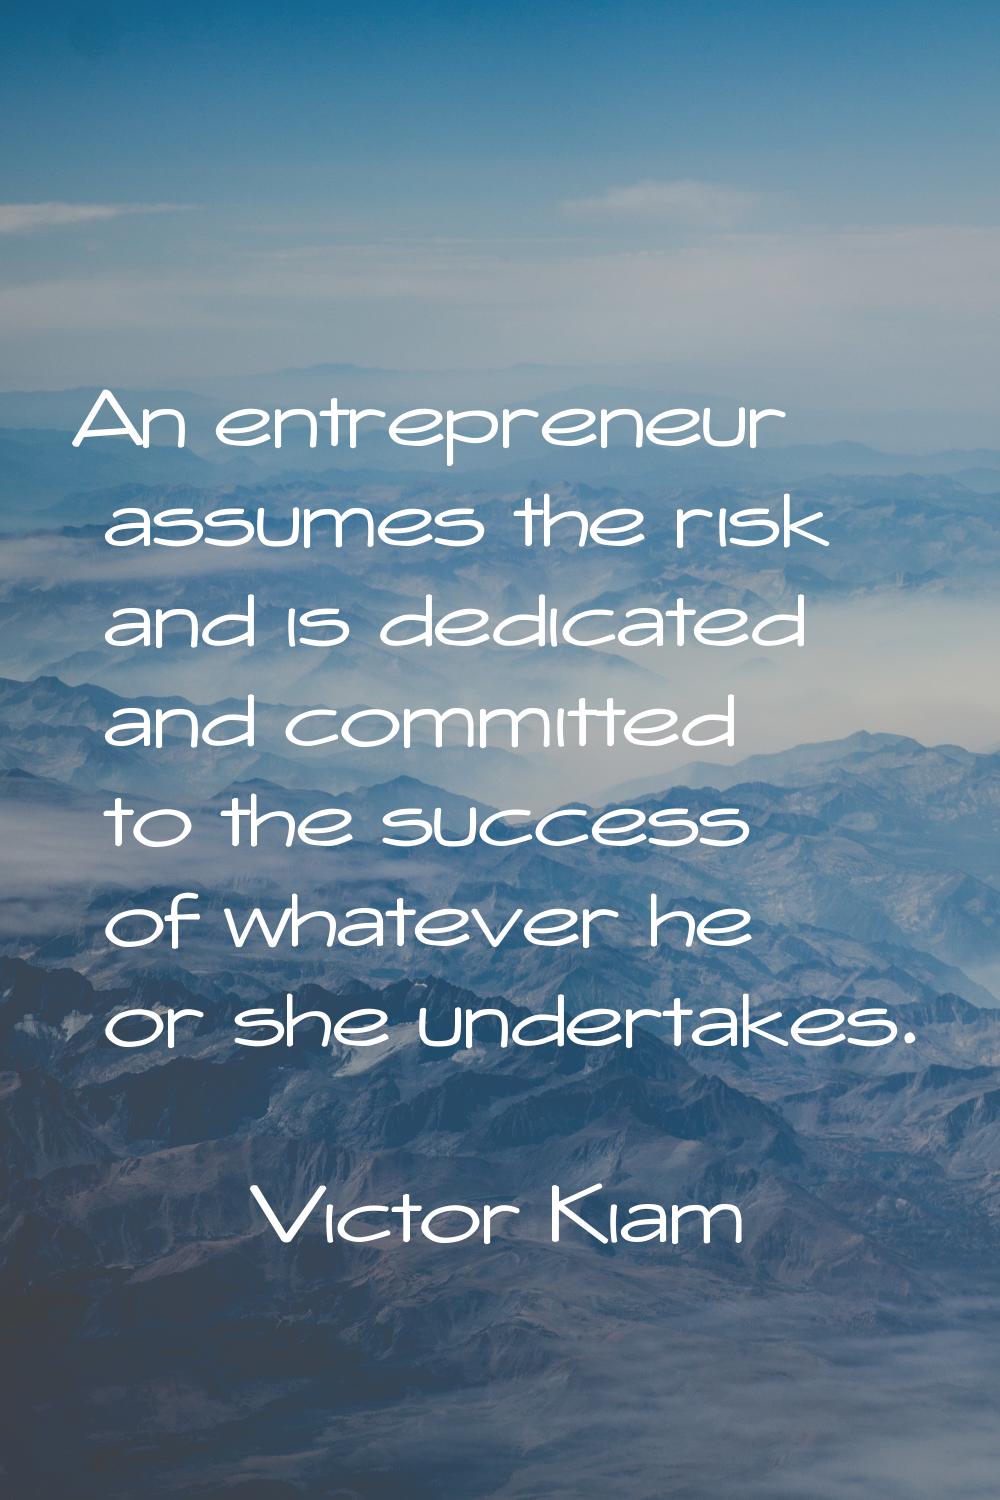 An entrepreneur assumes the risk and is dedicated and committed to the success of whatever he or sh